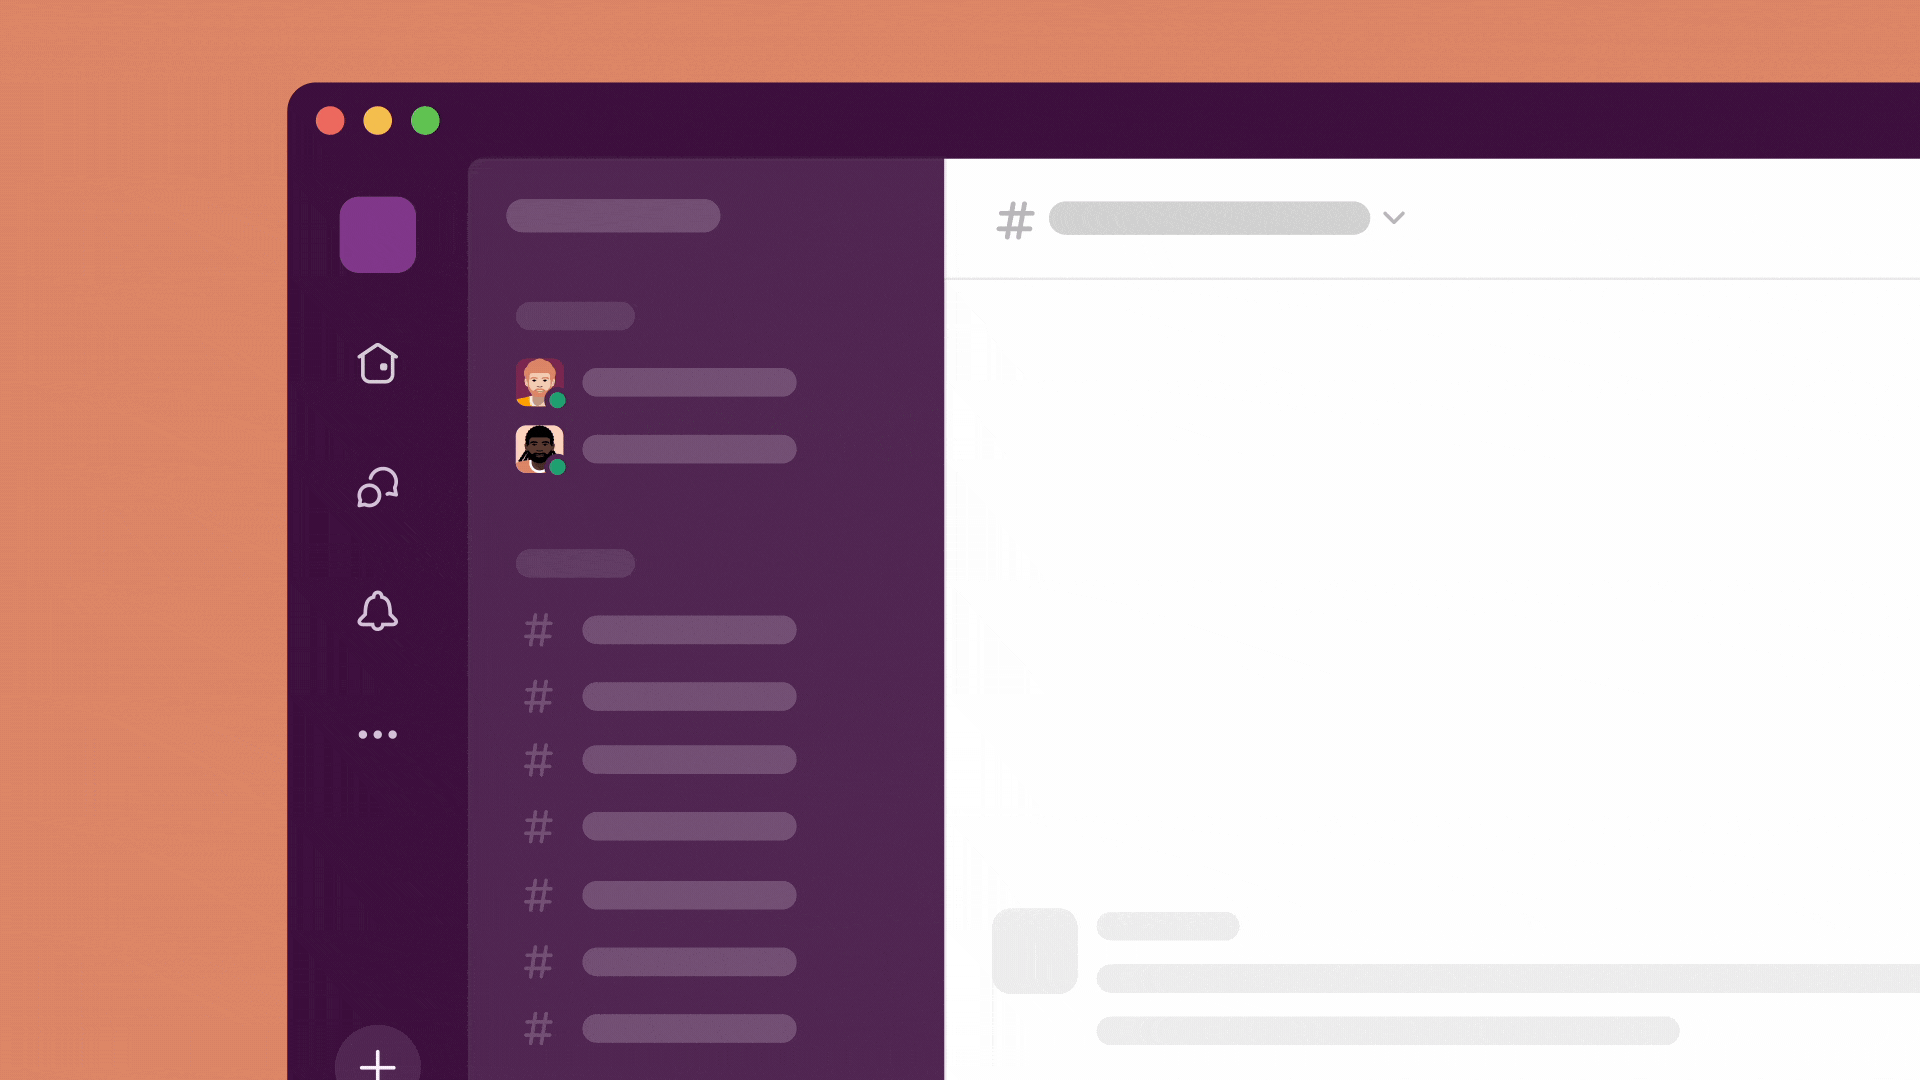 Organising conversations in the Slack sidebar into customised sections